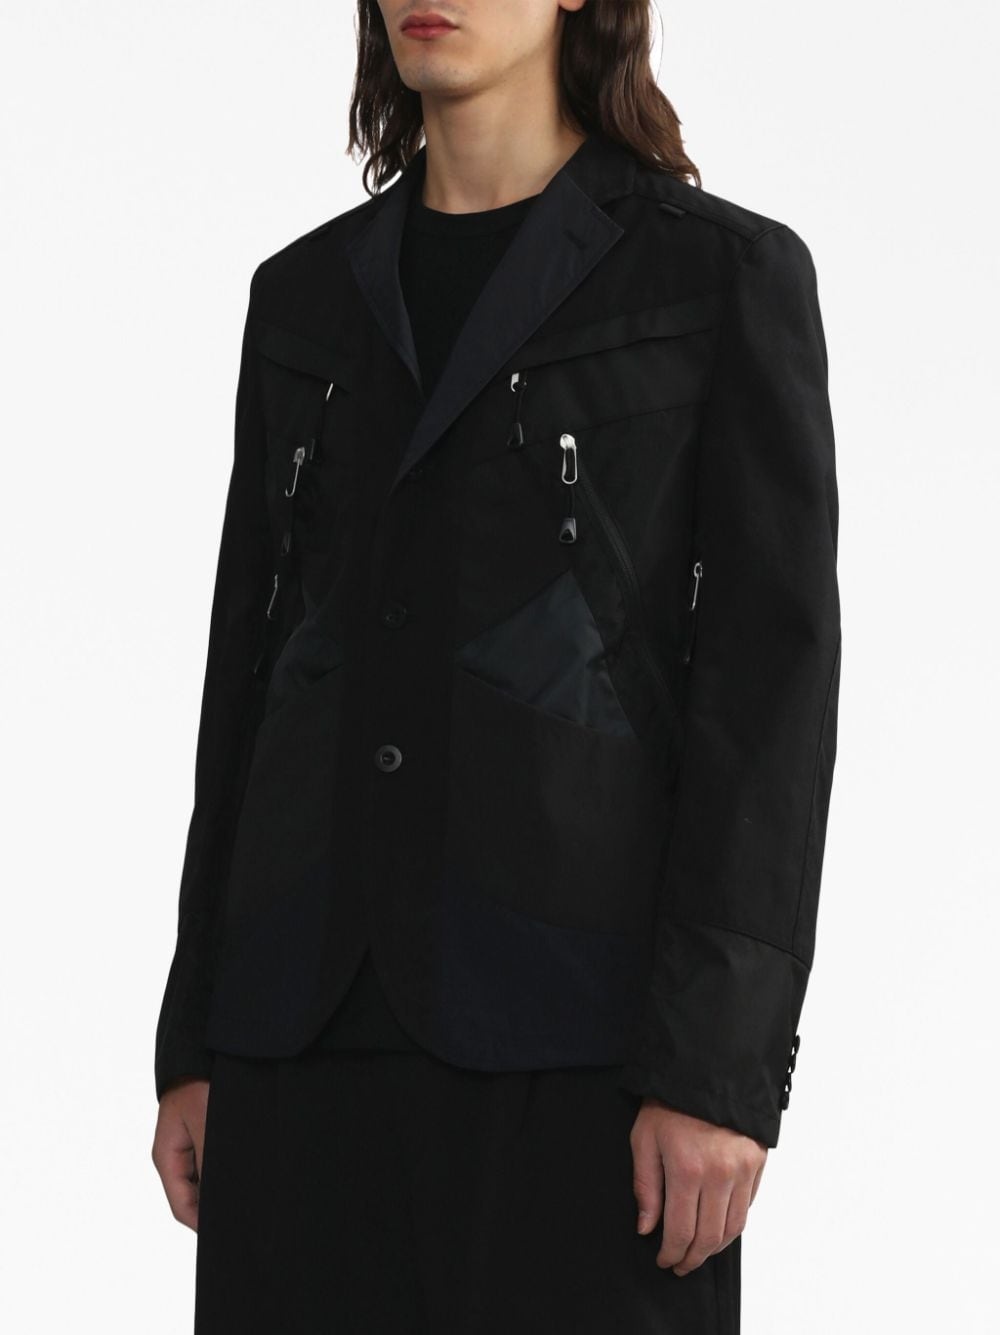 panelled double-breasted blazer